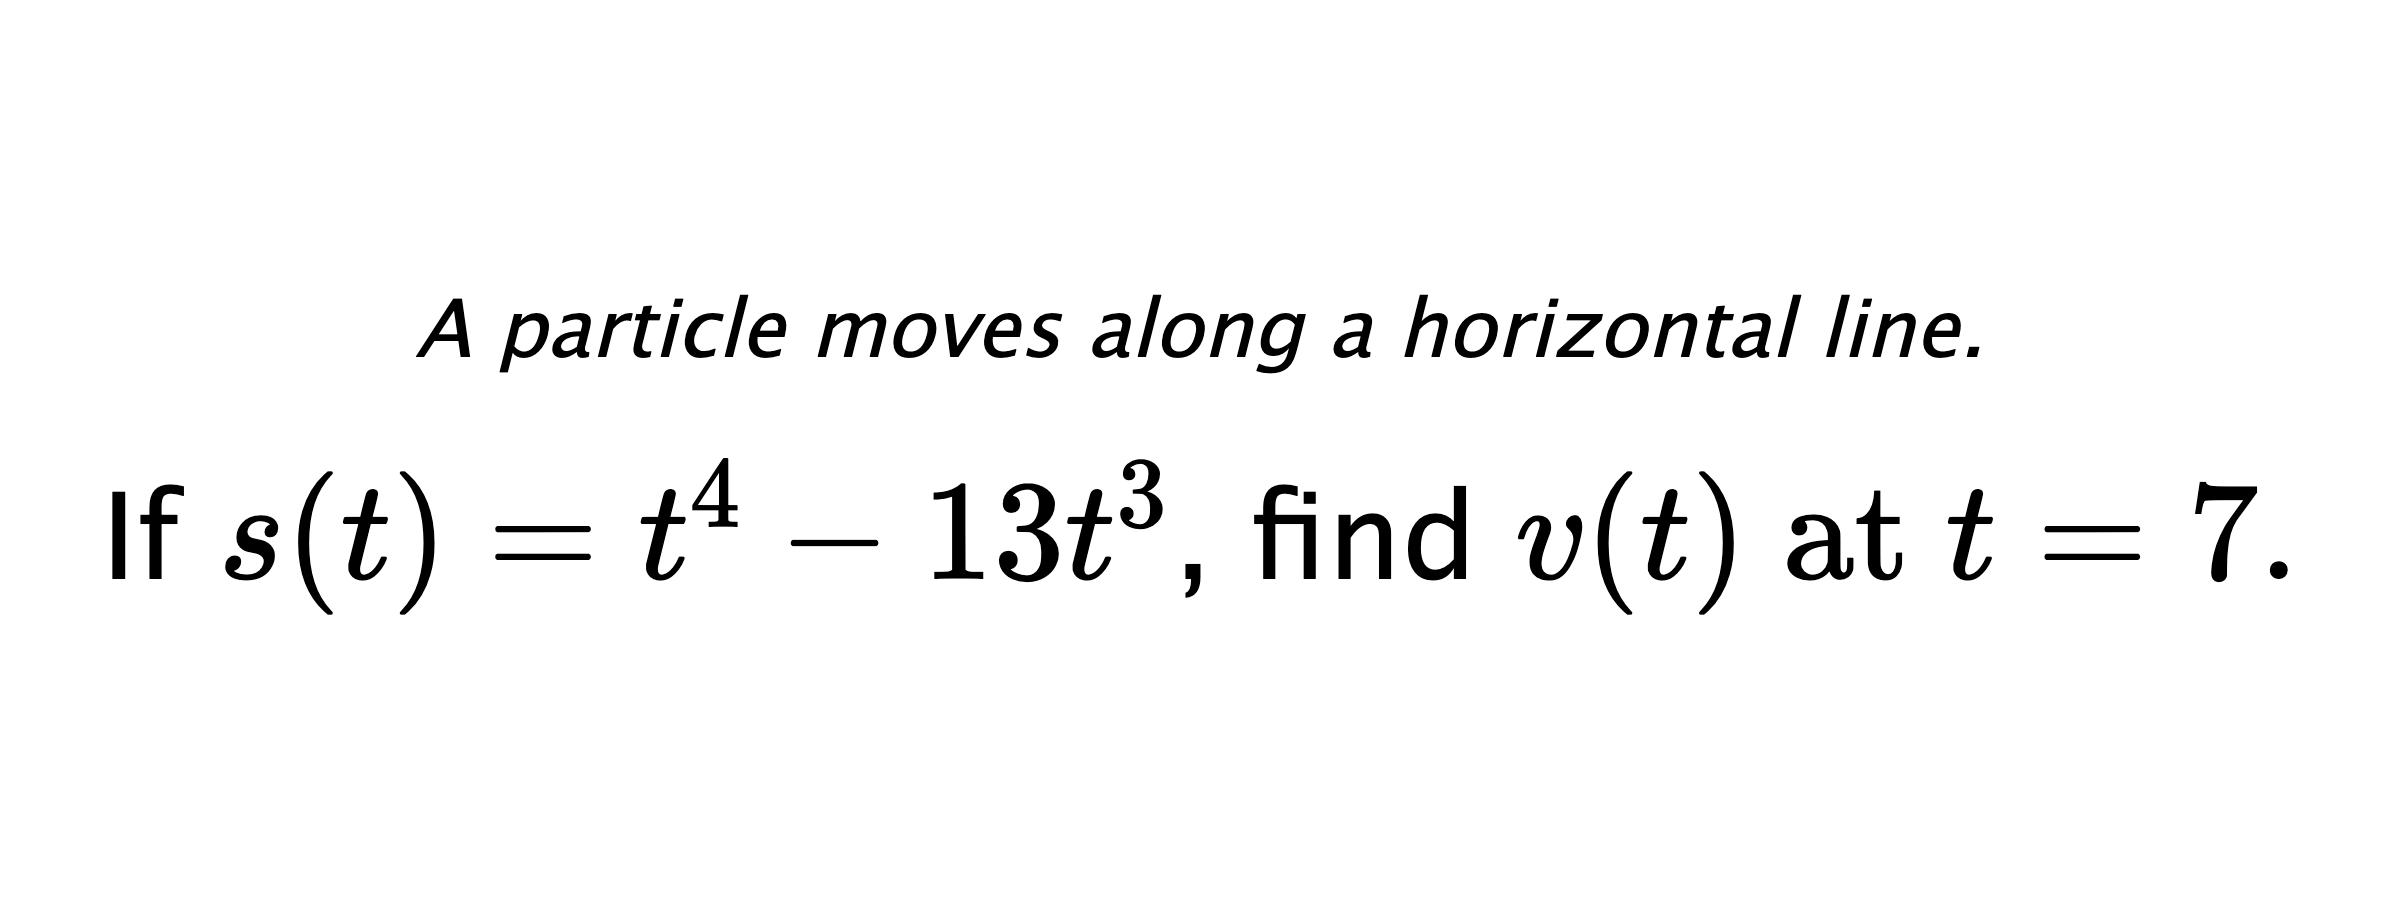 A particle moves along a horizontal line. If $ s(t)=t^4-13t^3 $, find $ v(t) \text{ at } t=7. $